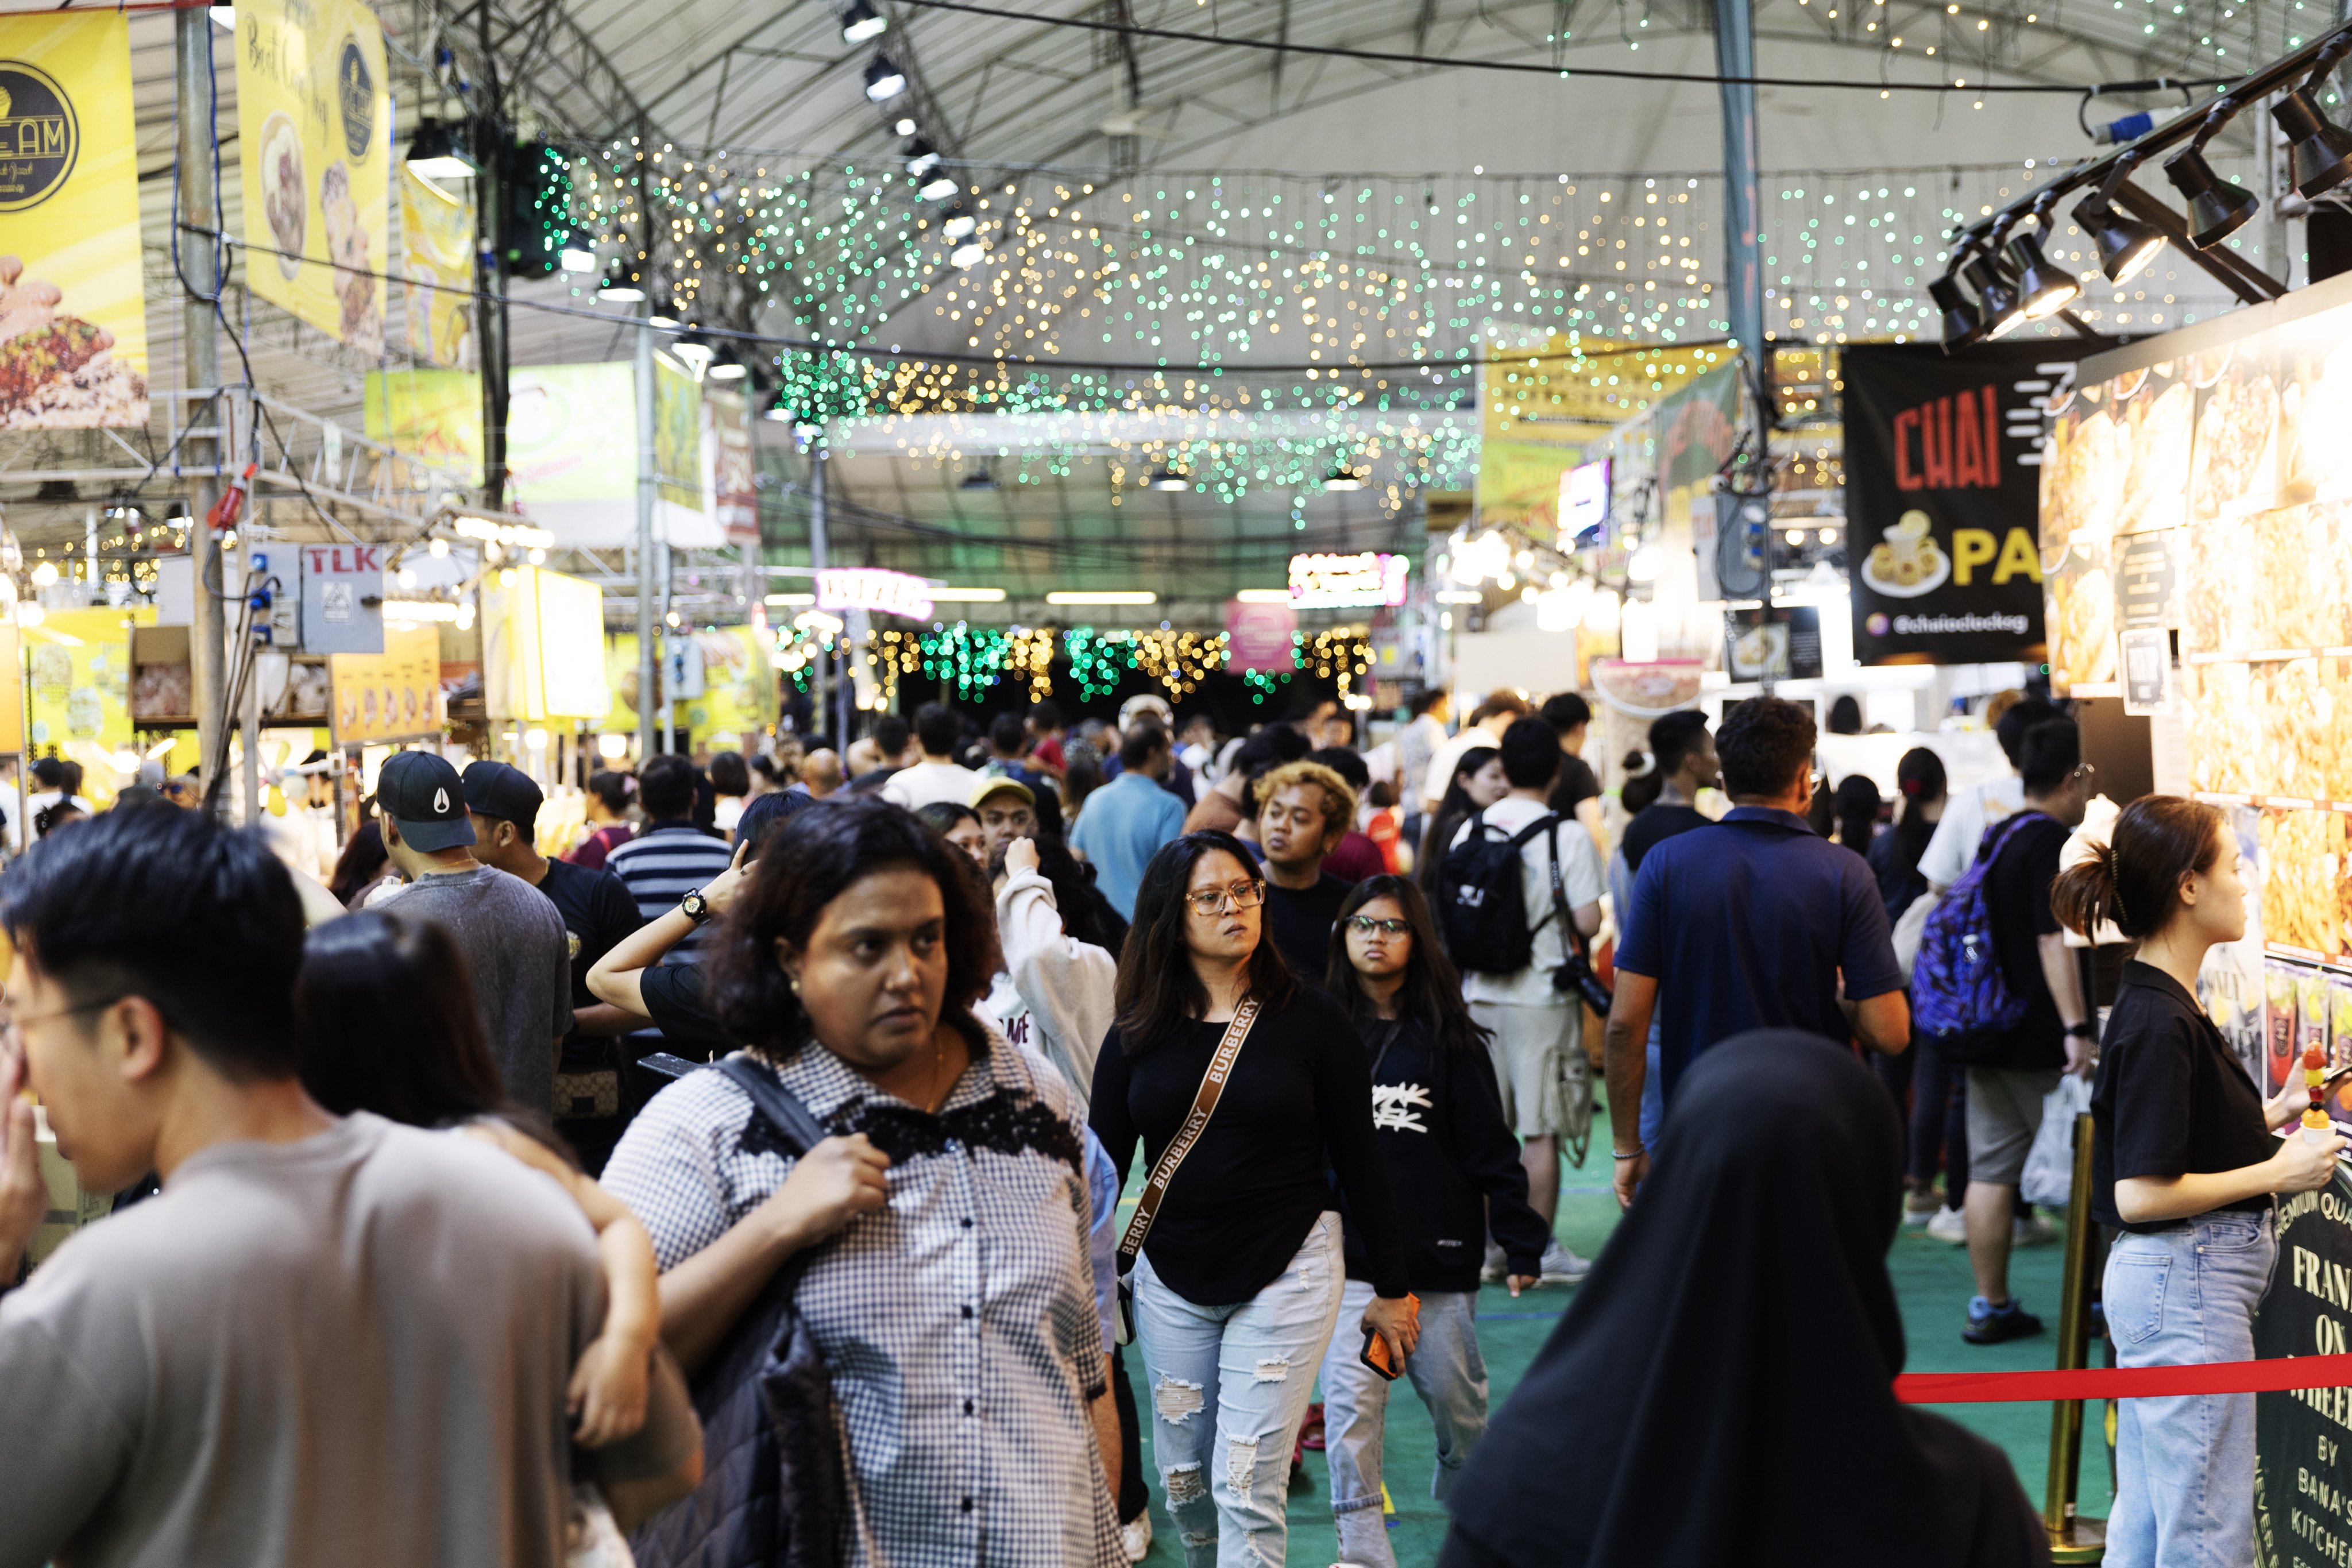 People walk at the Geylang Serai Ramadan Bazaar ahead of the Eid Al-Fitr celebration, in April. Singapore has fared well in global studies for its management of race relations, Law Minister K Shanmugam has said. Photo: EPA-EFE